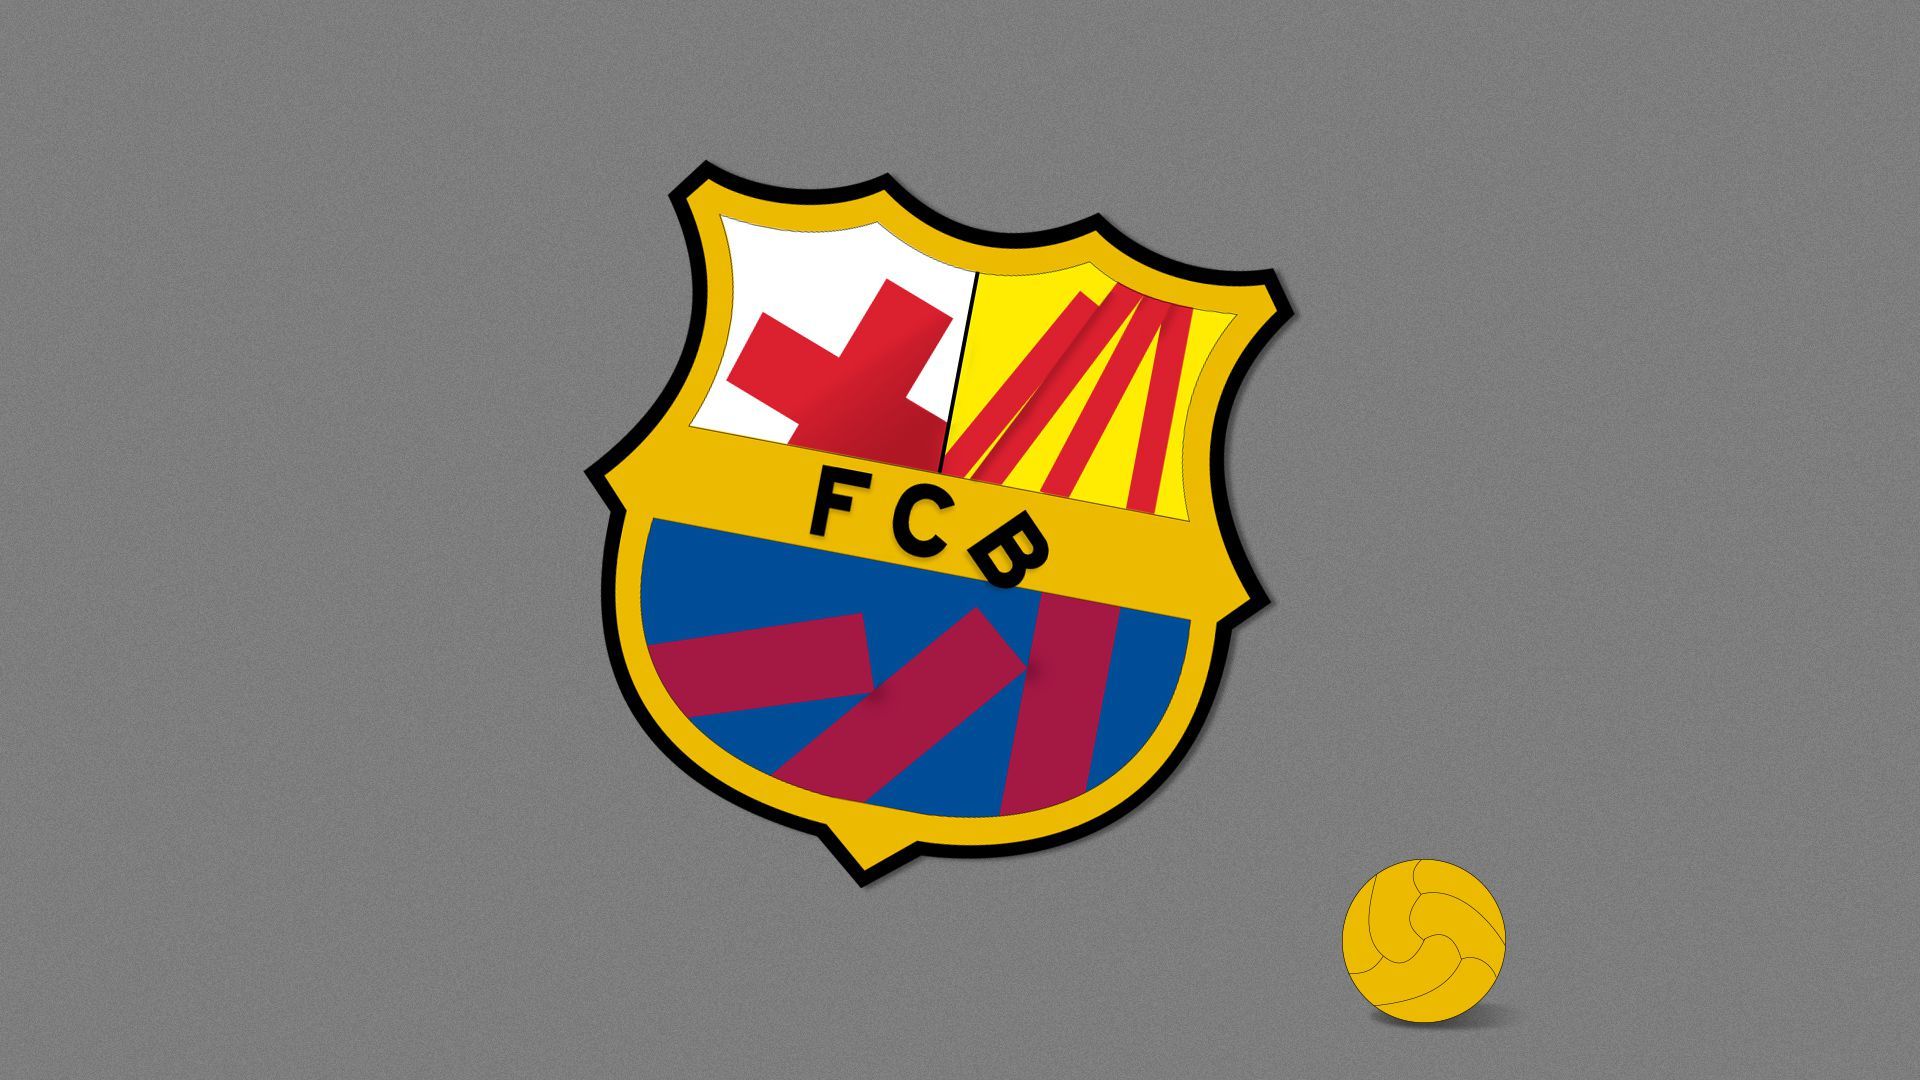 Illustration of the FC Barcelona shield logo hanging askew and falling apart. 